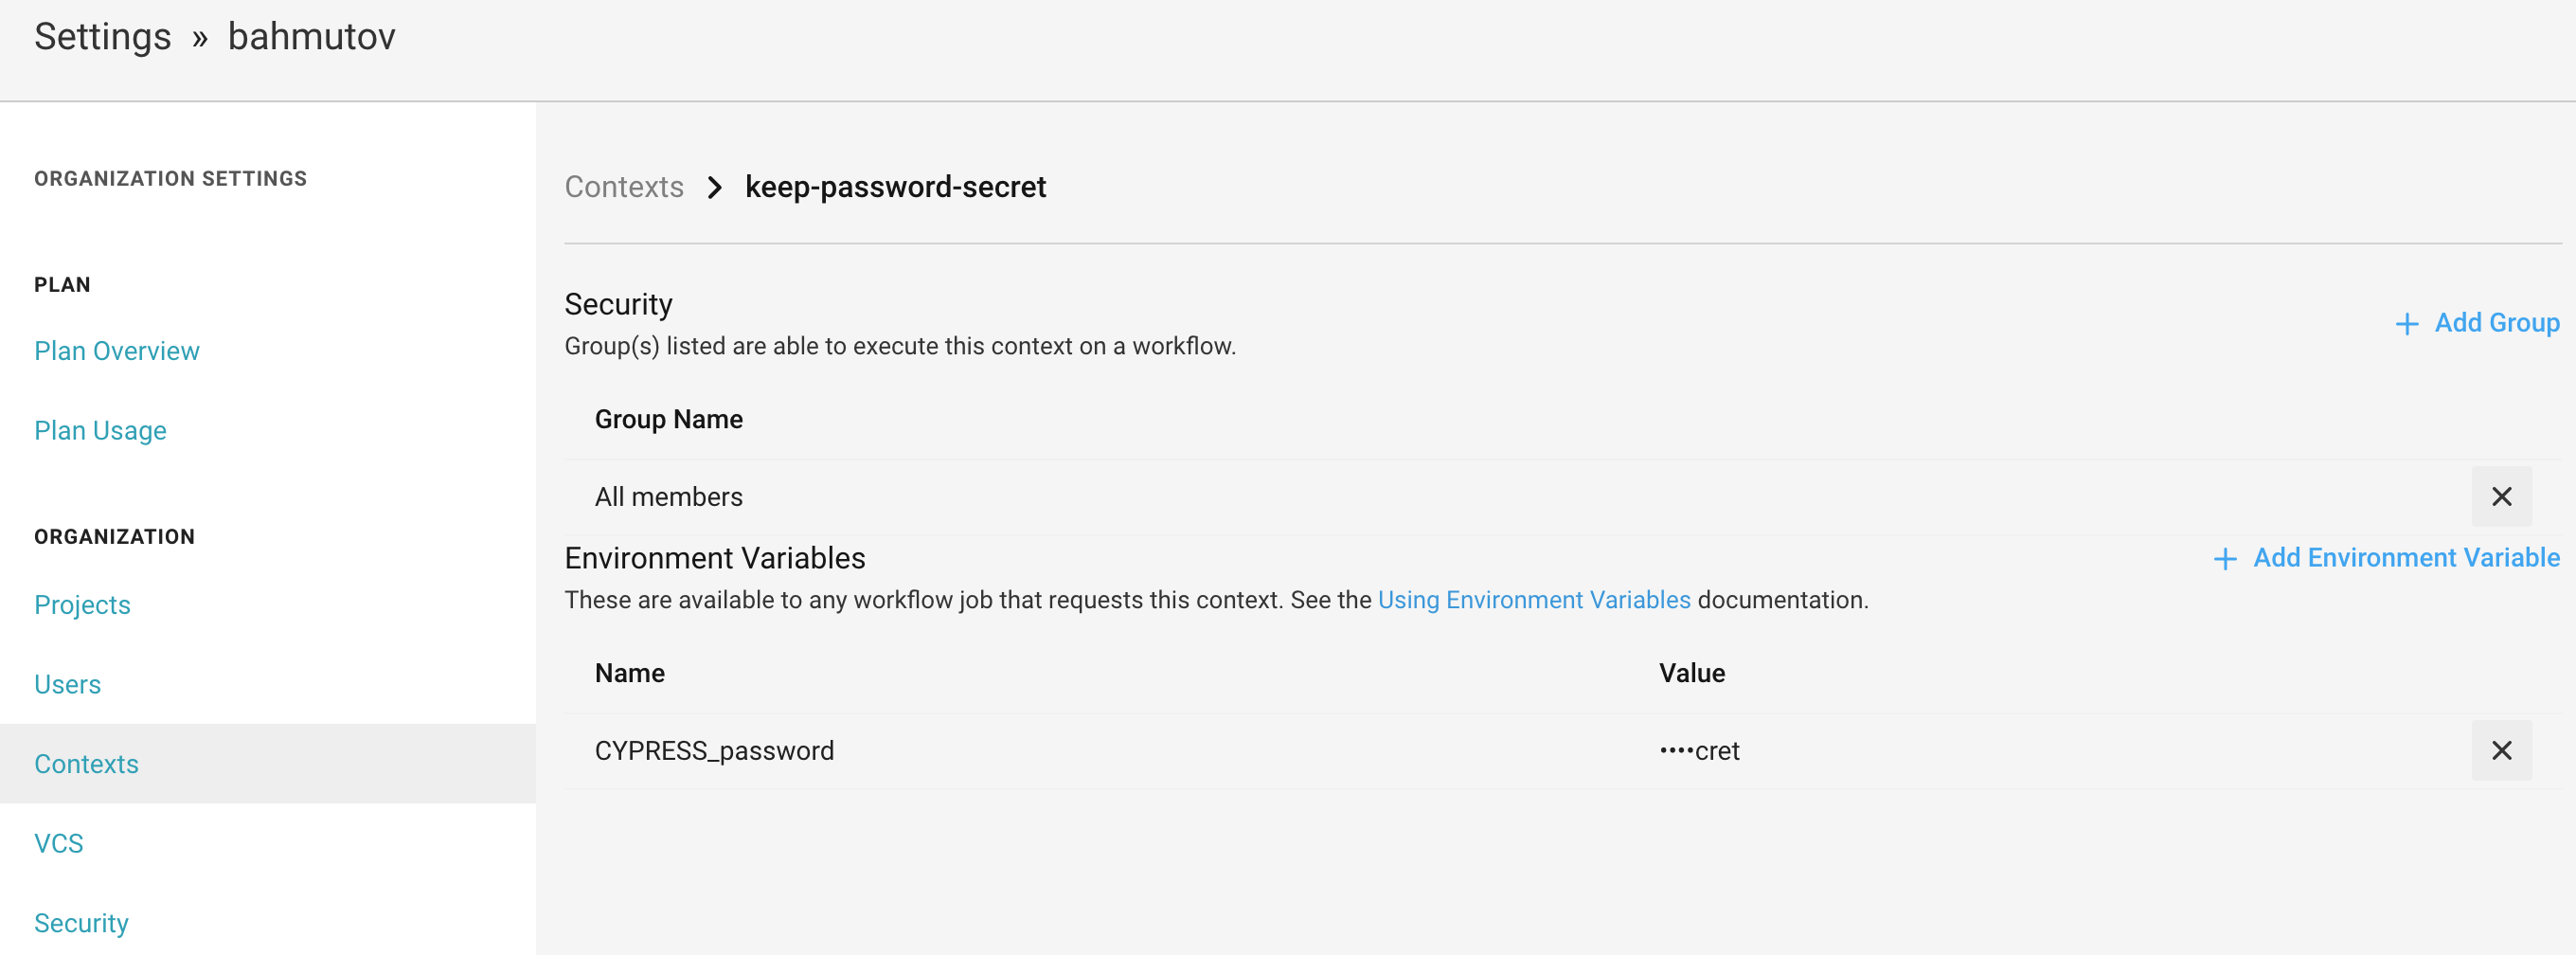 Created security context with the password environment variable